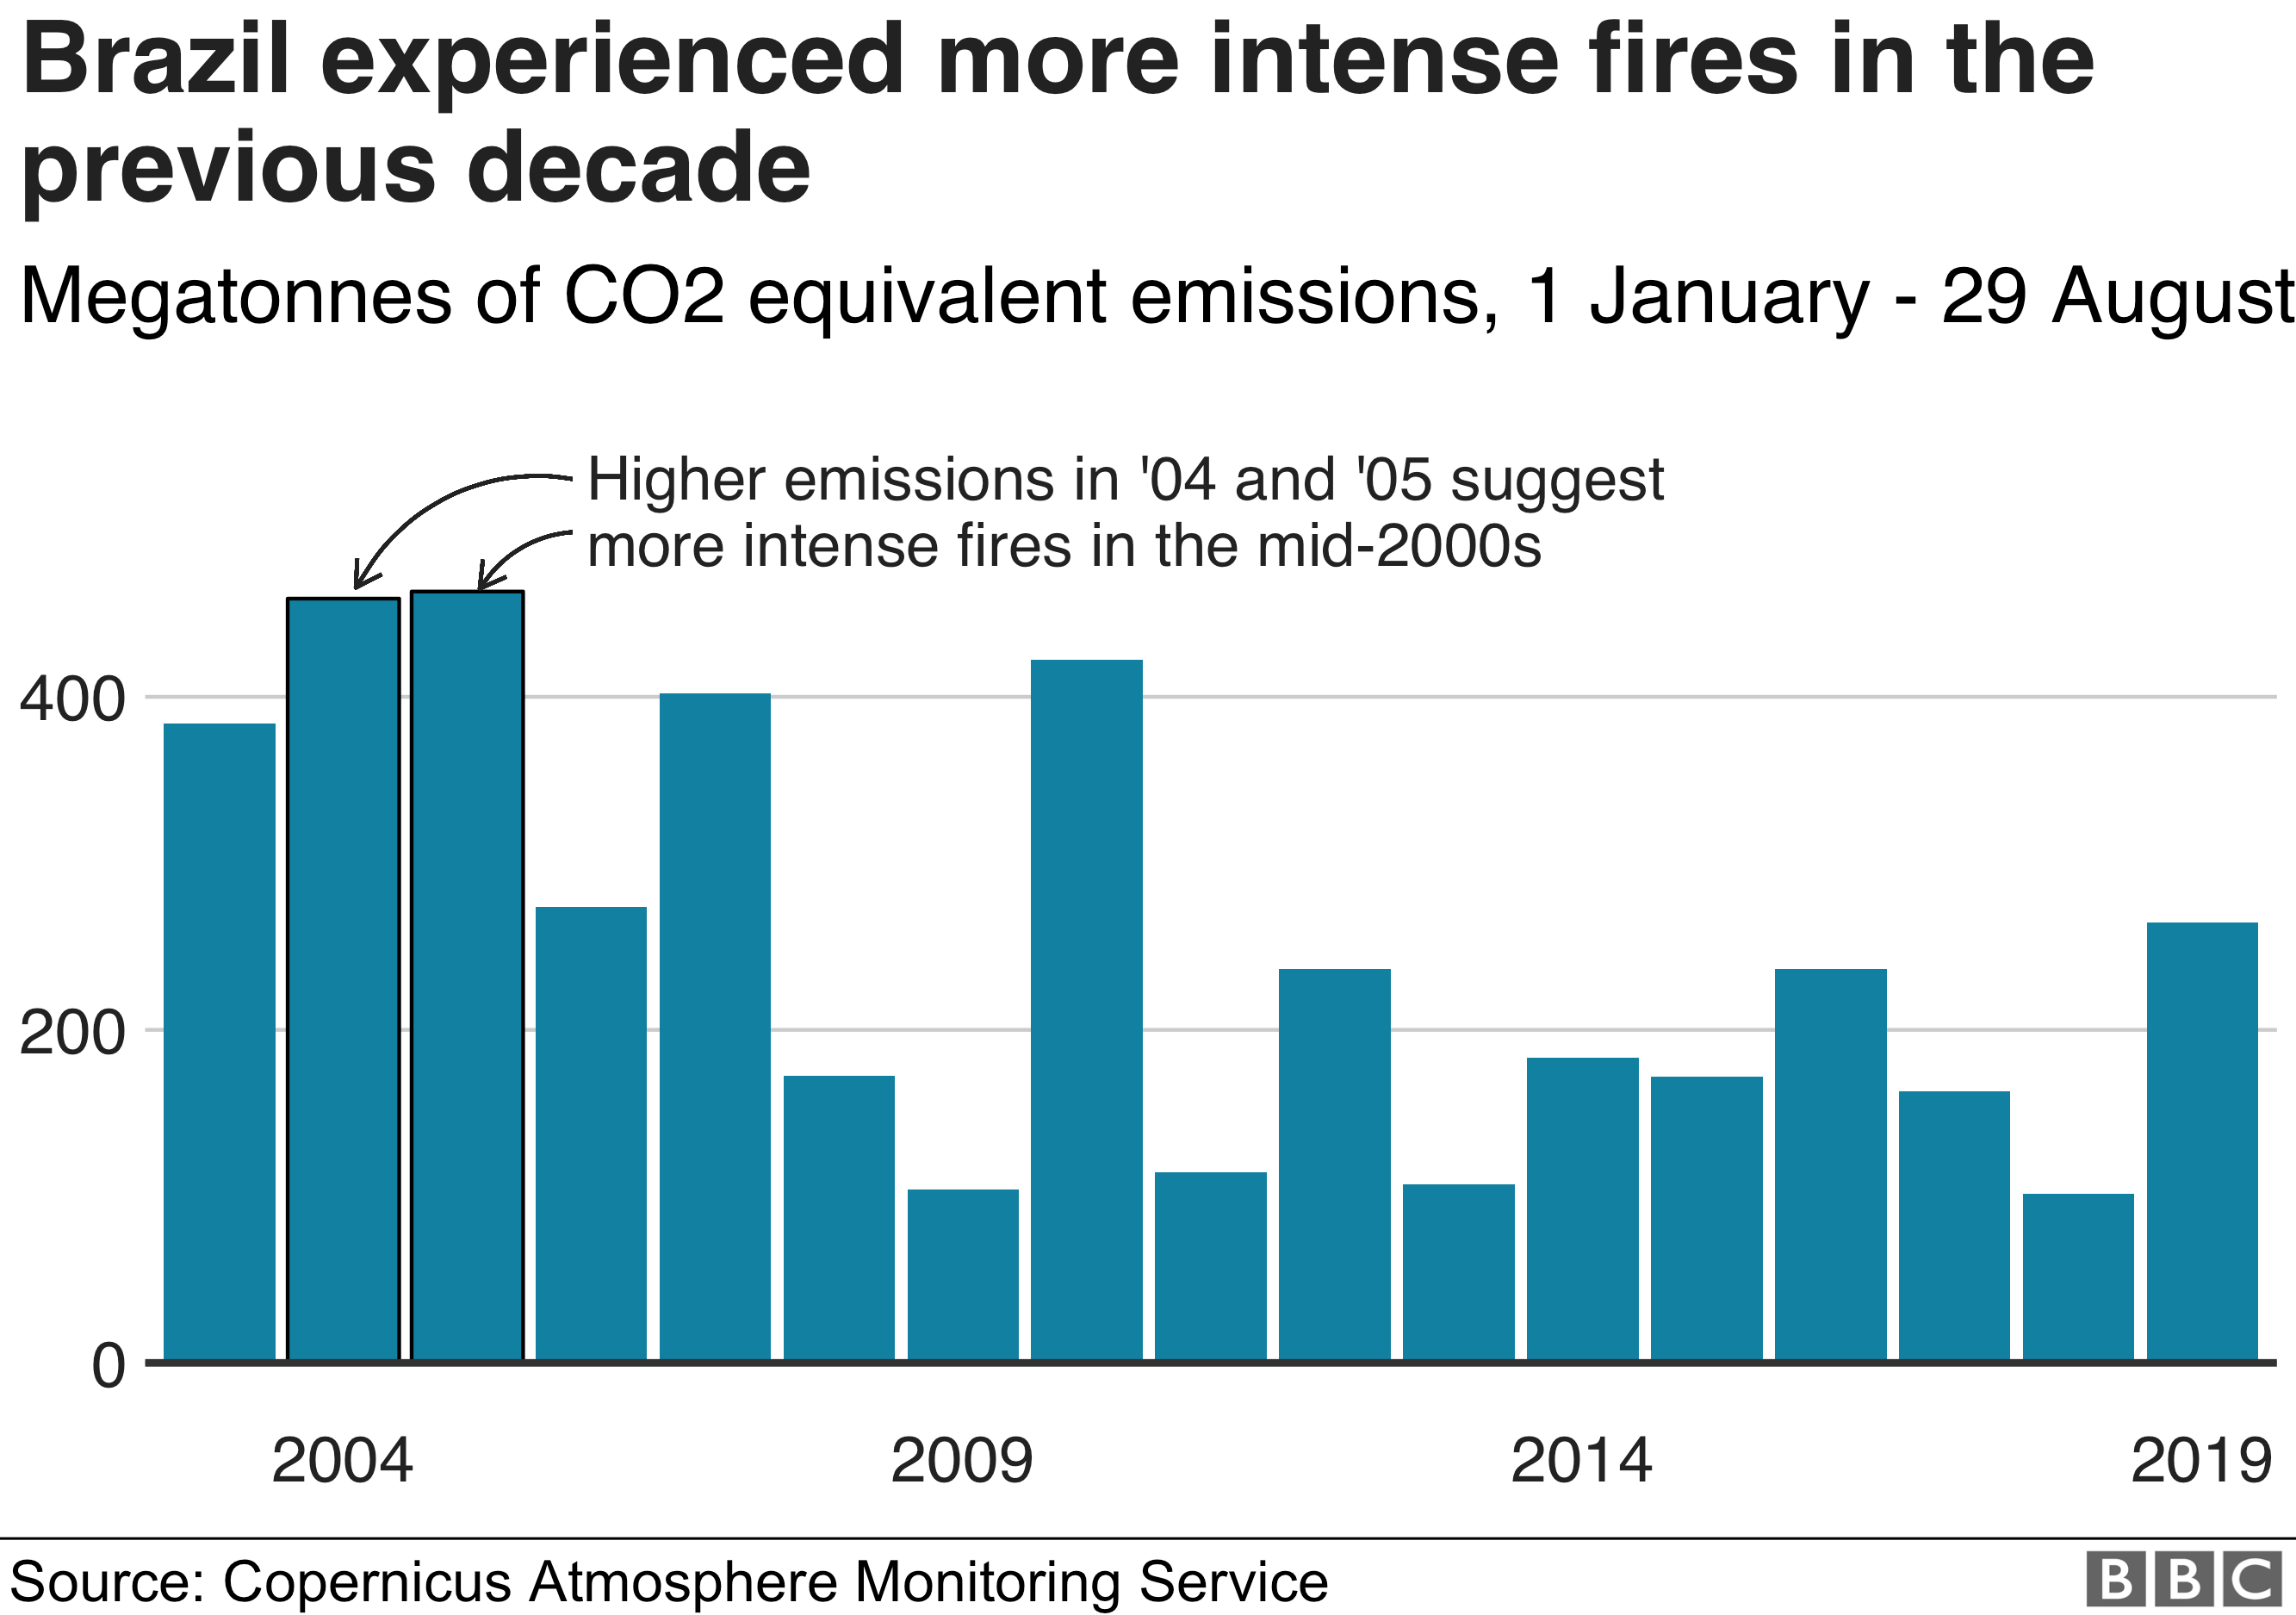 Chart showing the total CO2 equivalent emissions year on year in Brazil, showing how Brazil experienced more intense fires in the mid-2000s